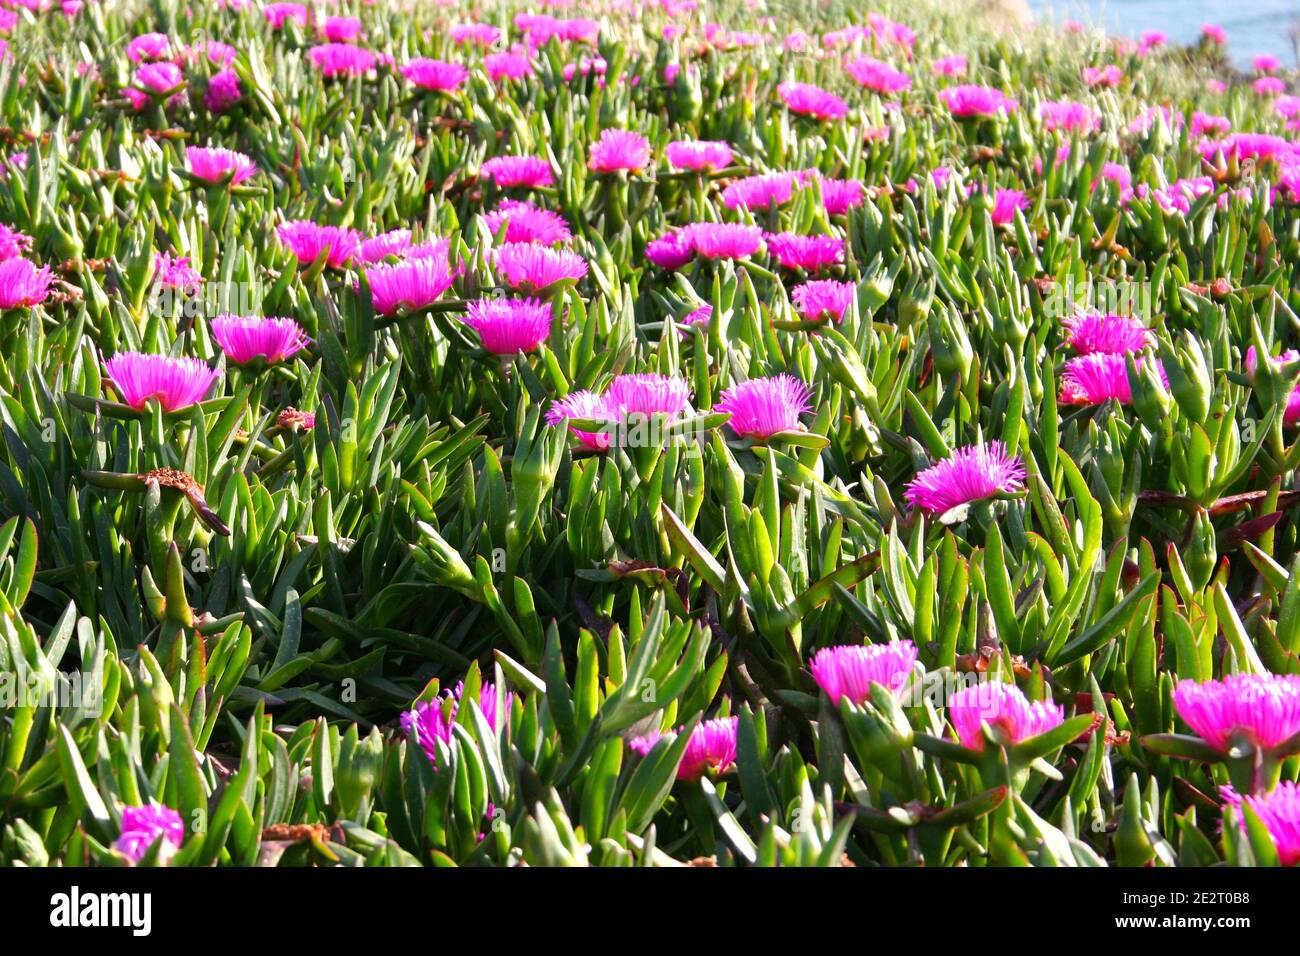 Bright pink flowers Sally-my-handsome plant (Carpobrotus acinaciformis) also known as a Hottentot Fig-marigold, Giant Pigface, Sea Fig, or Sour Fig Stock Photo